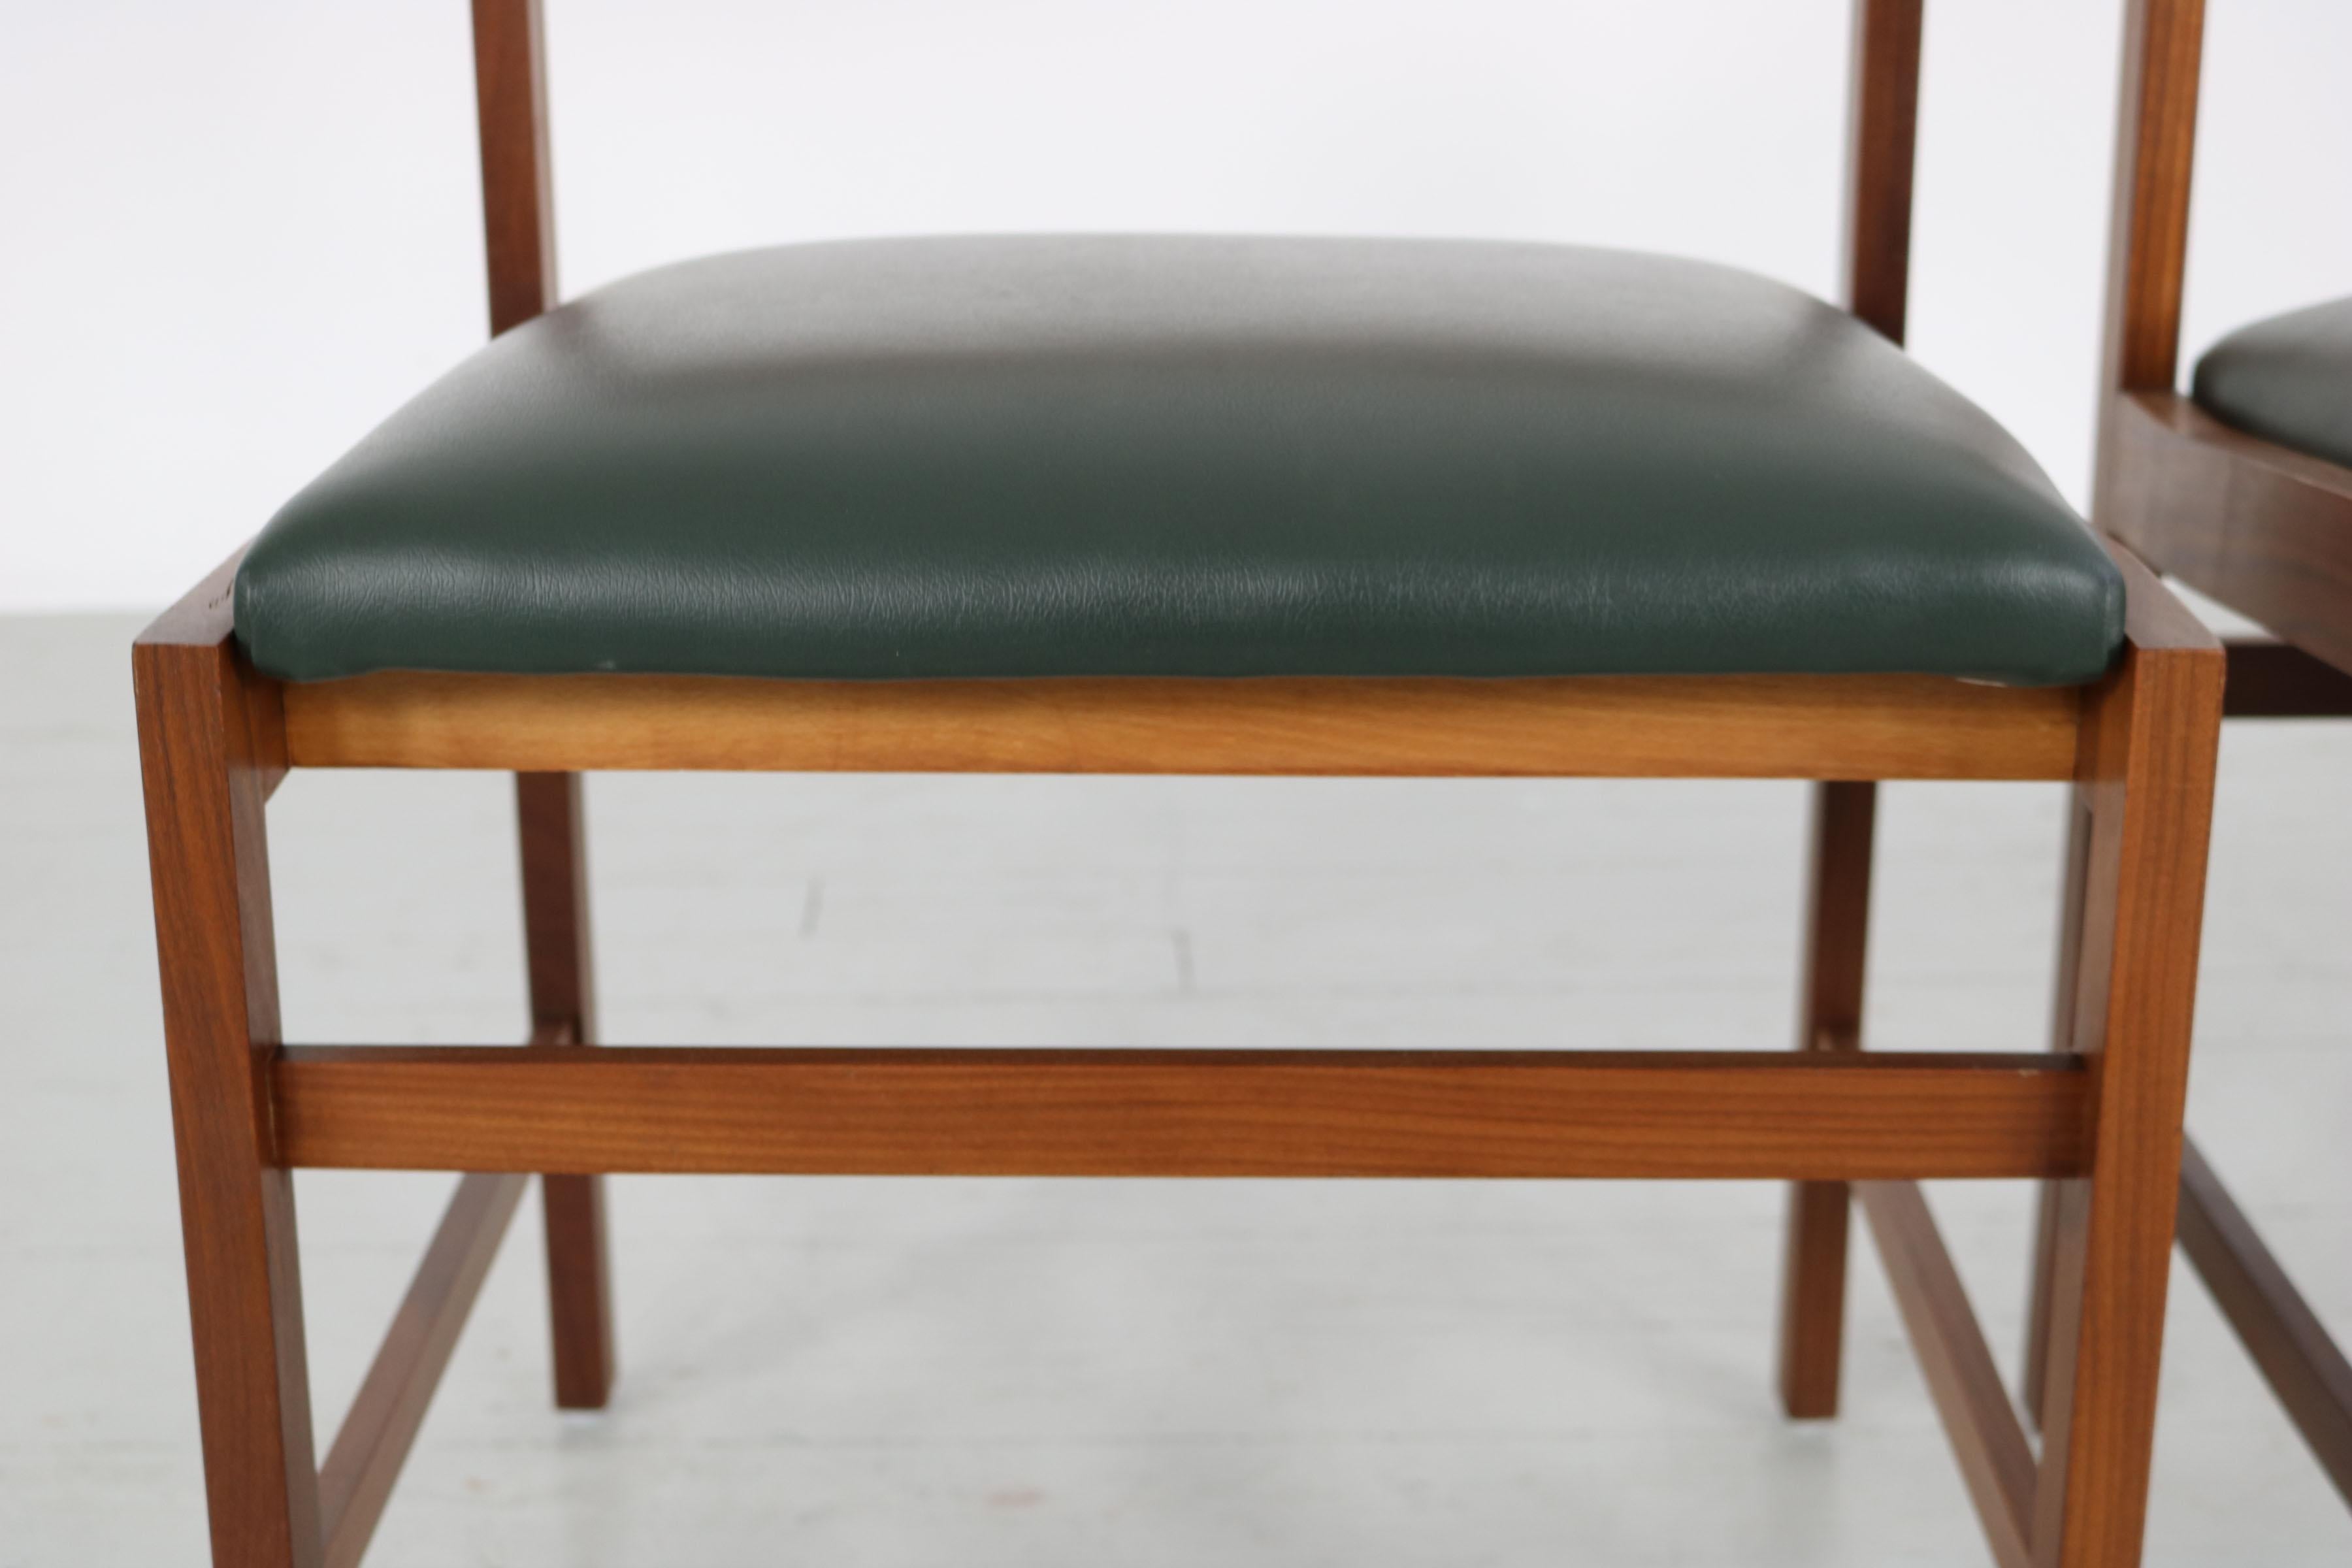 Set of 3 Solid Wooden Chairs with Dark Green Leatherette Upholstery, 1960s For Sale 5